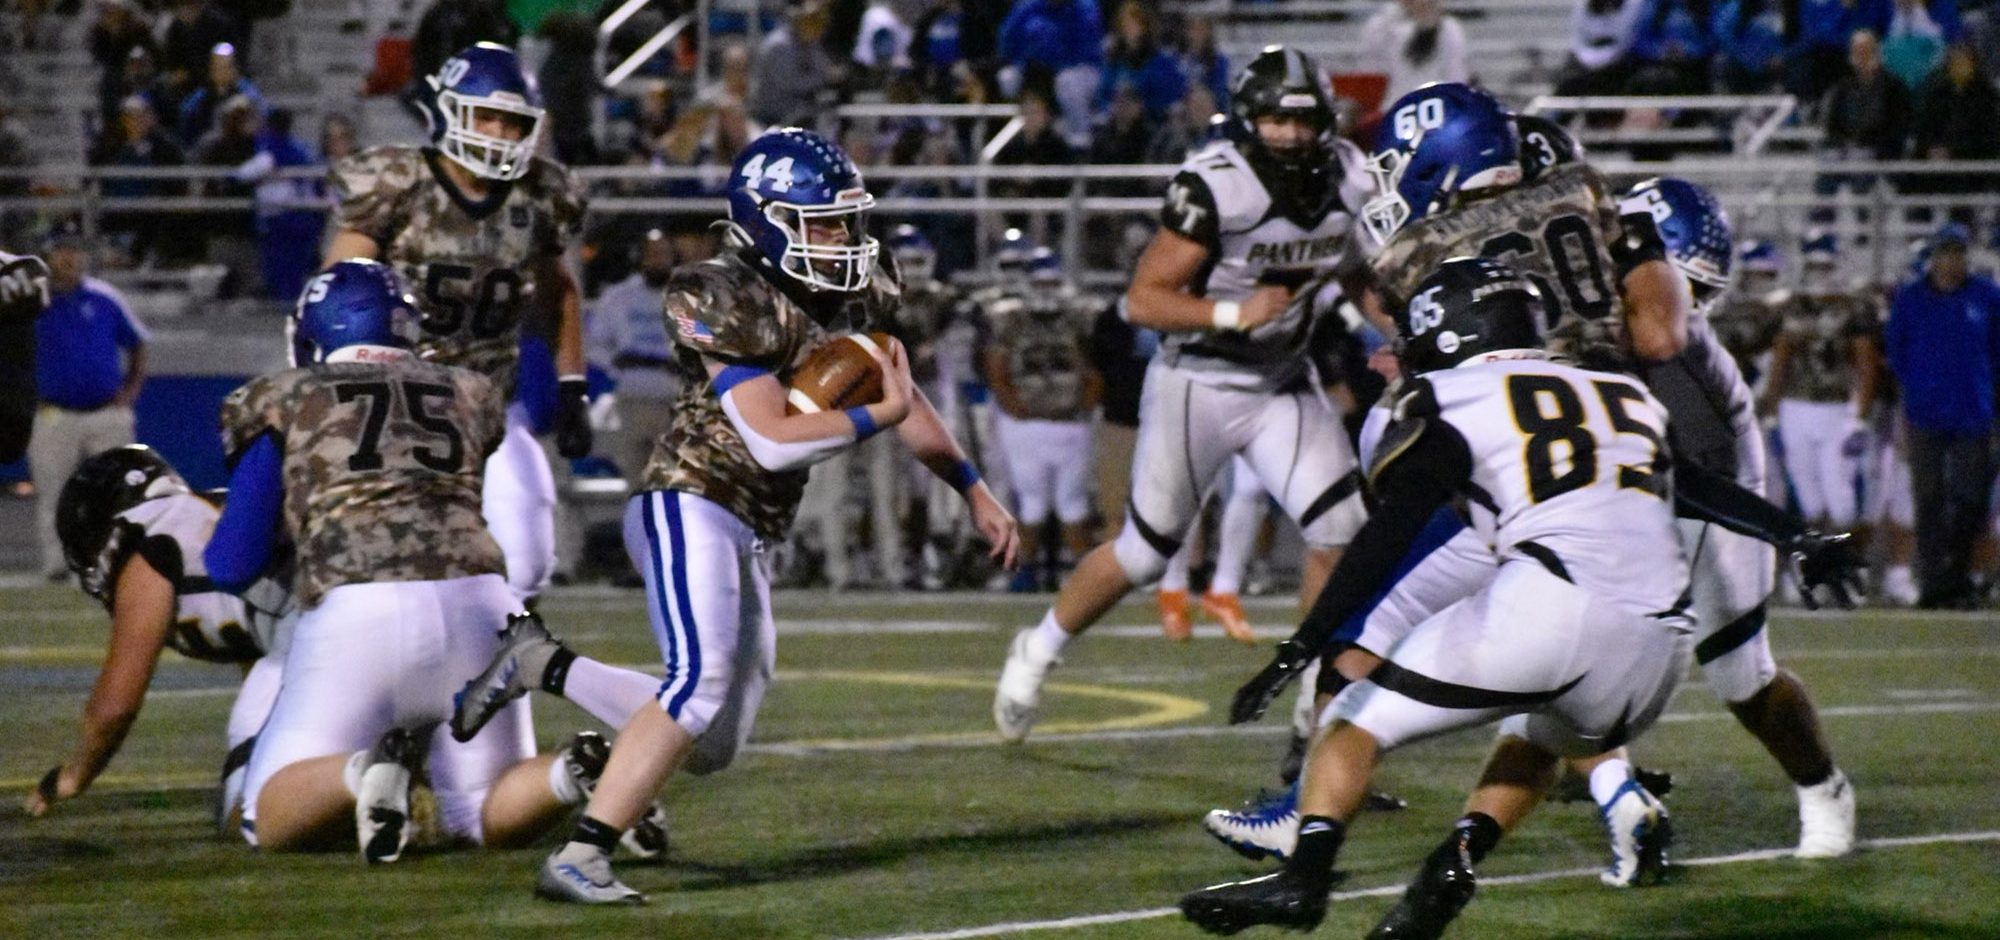 Chillicothe gets revenge win against Miami Trace in overtime thriller